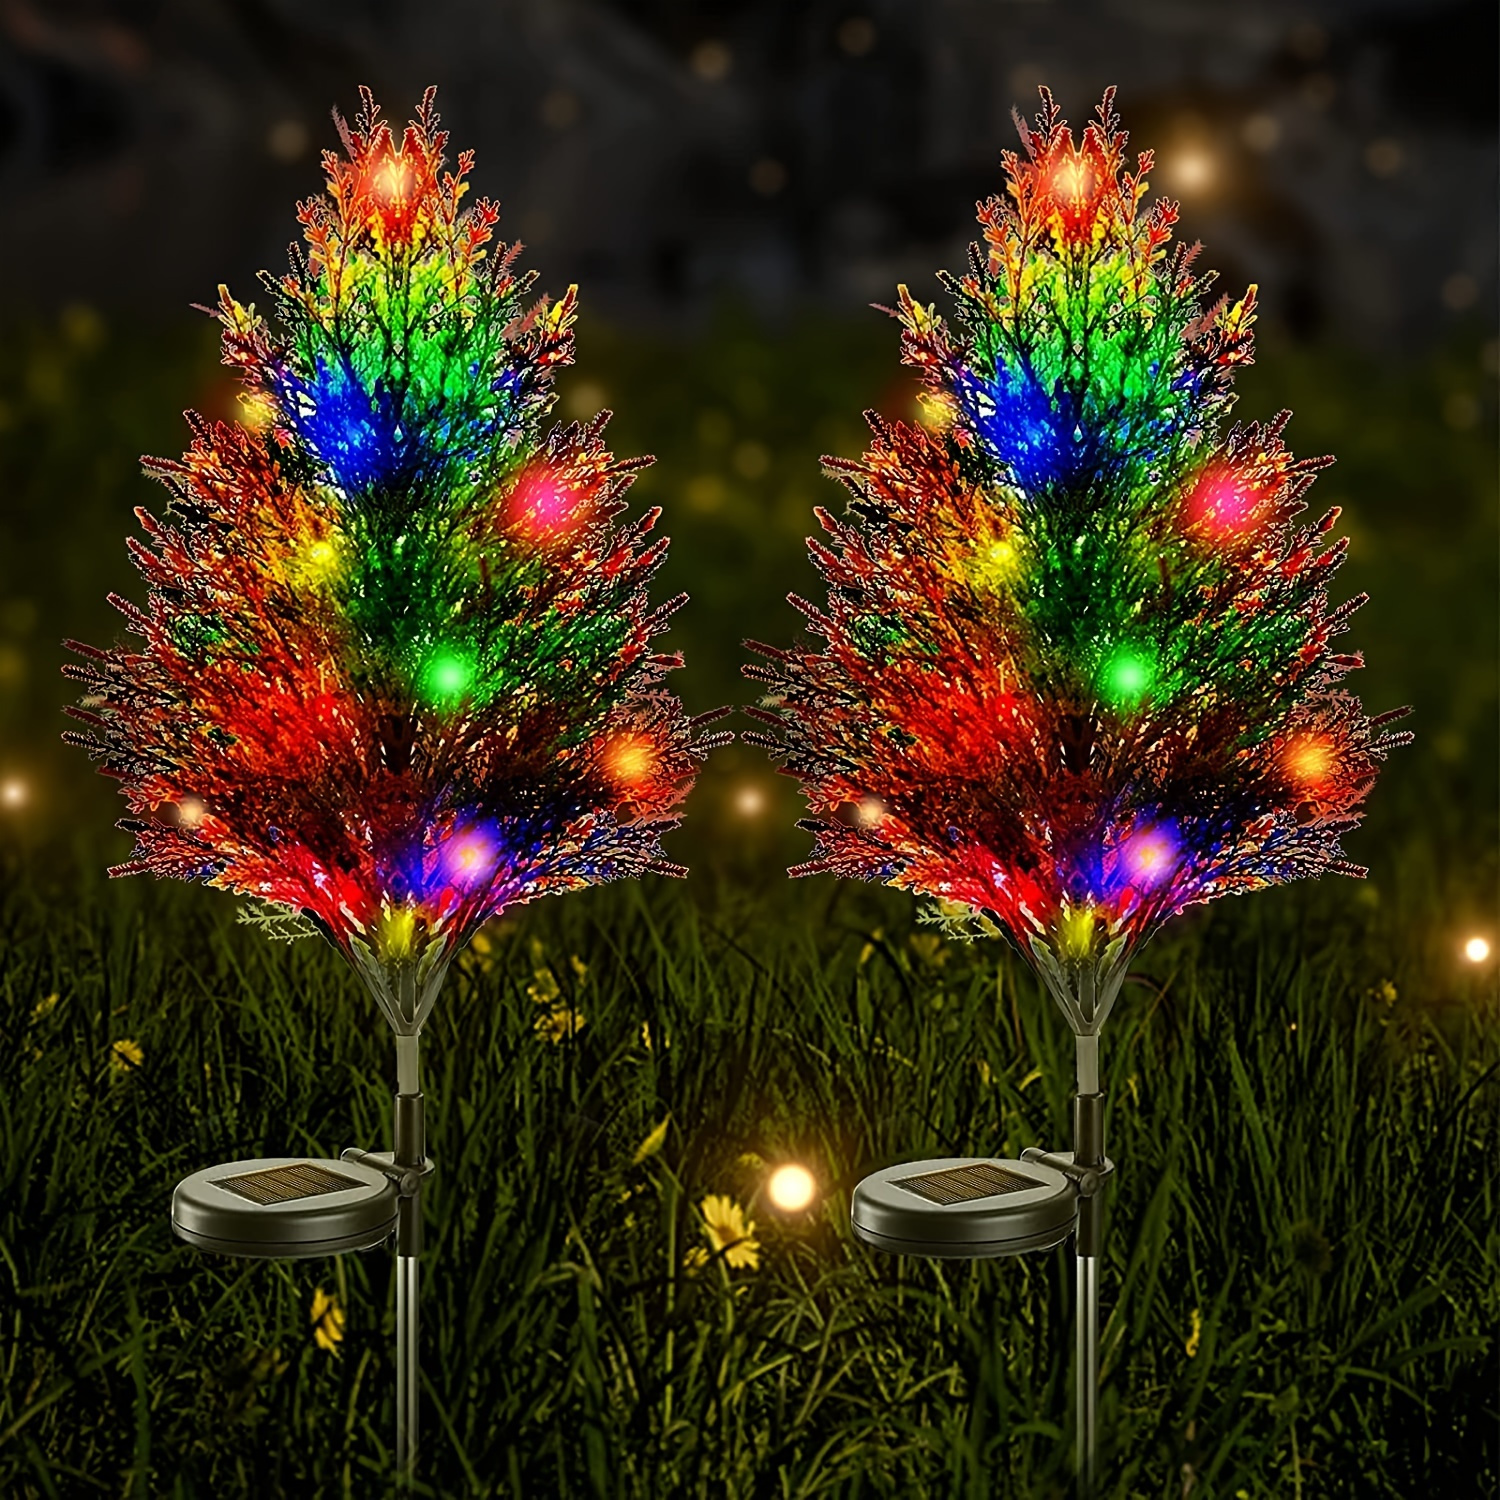 

2pcs Solar Christmas Tree Lights Waterproof, Solar Power Stake Led Outdoor Lighting, Colorful Flickering Pine Lights For Yard Patio Lawn Pathway Christmas